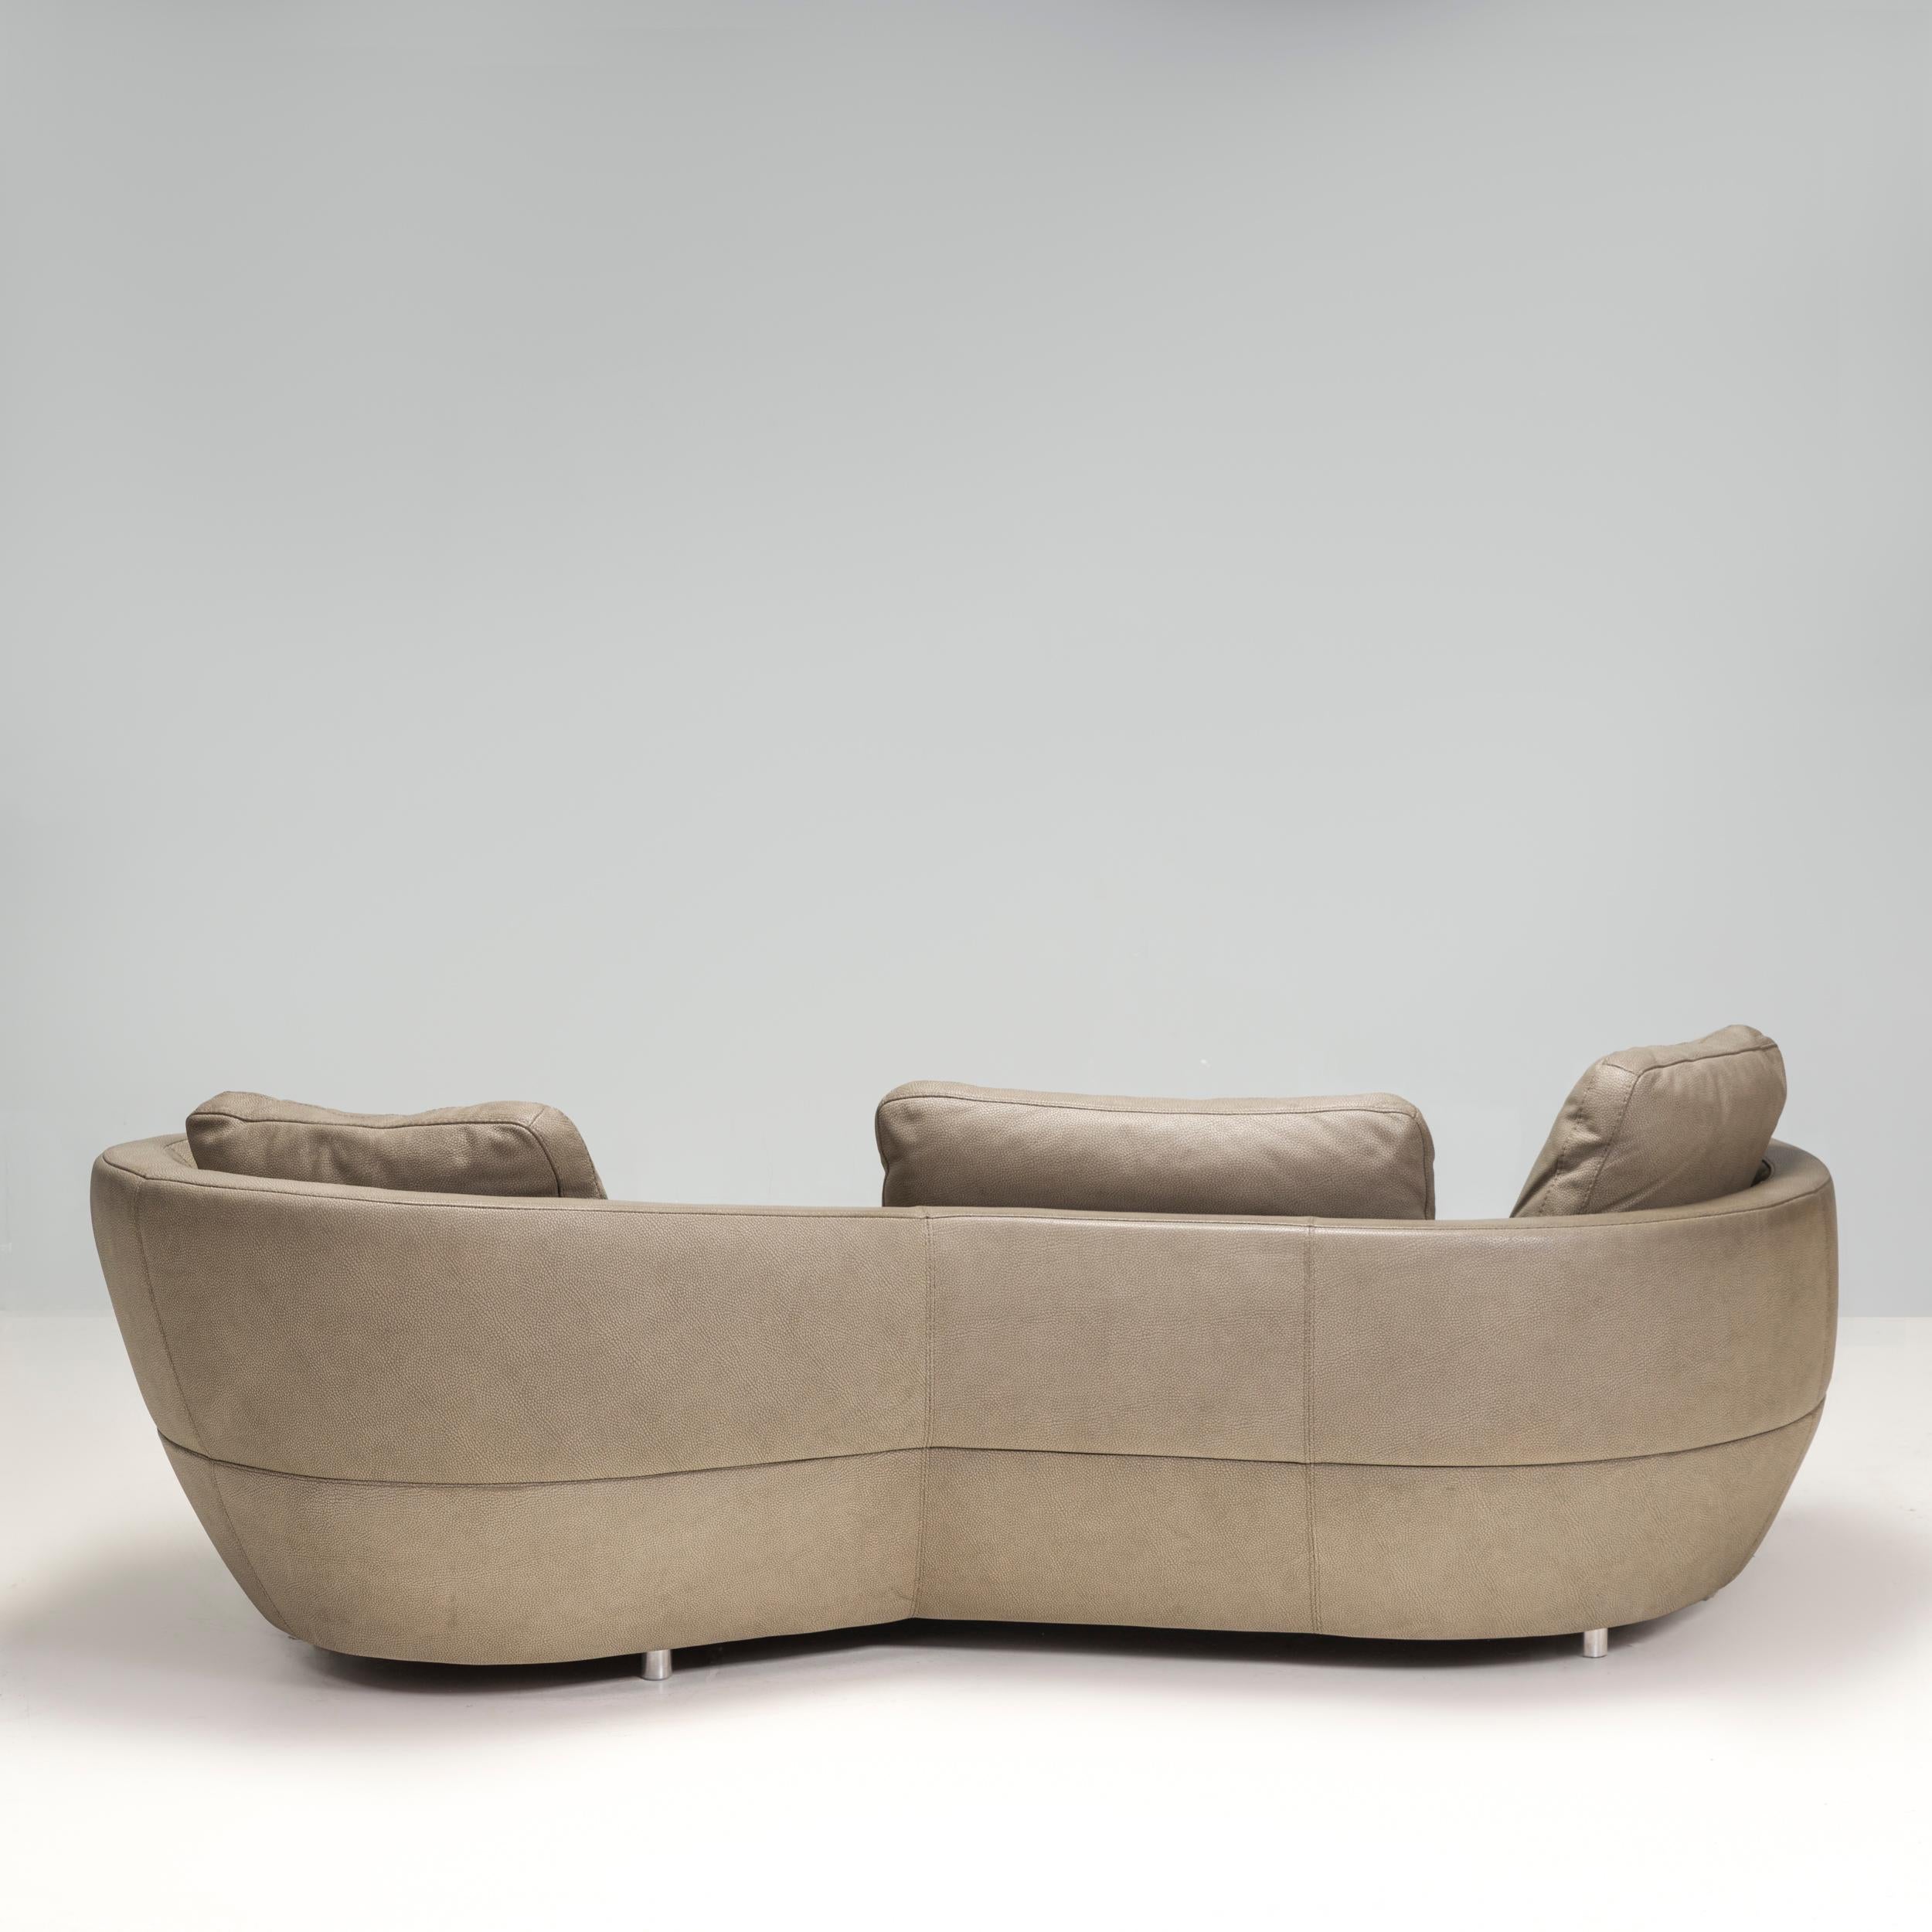 Contemporary Roche Bobois by Gabriele Assmann & Alfred Kleene Leather Digital Curved Sofa For Sale